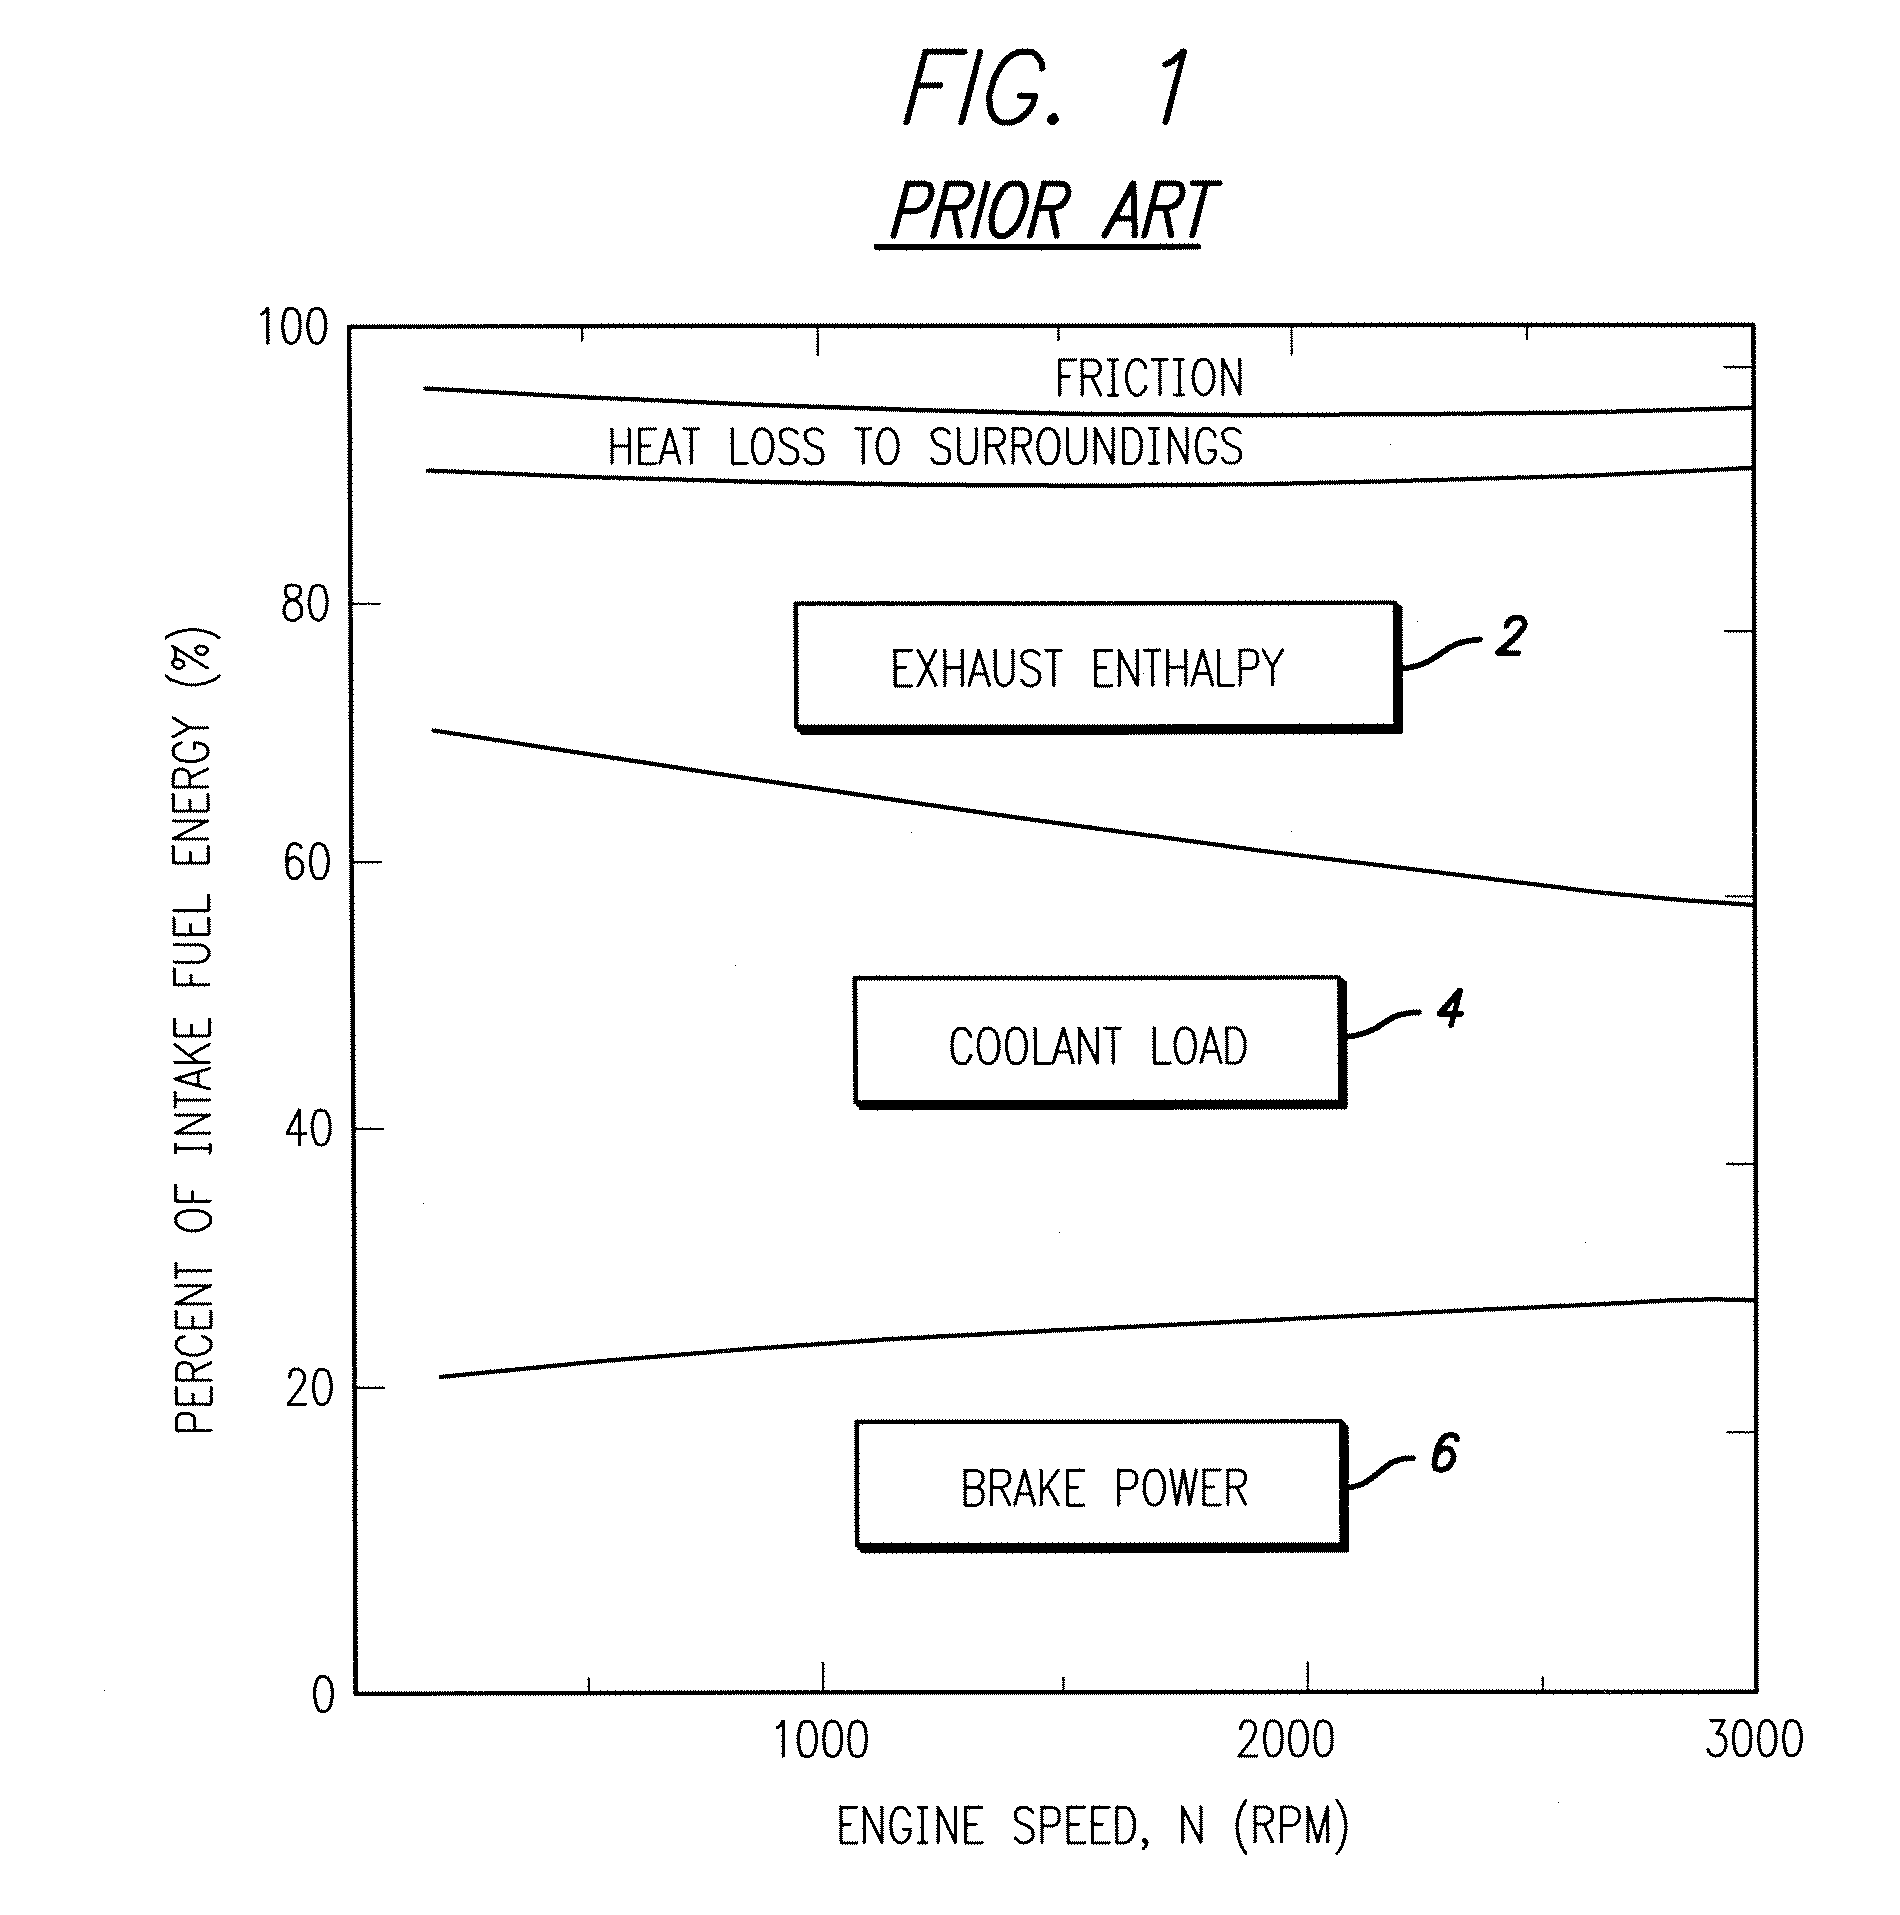 Injector-ignition for an internal combustion engine